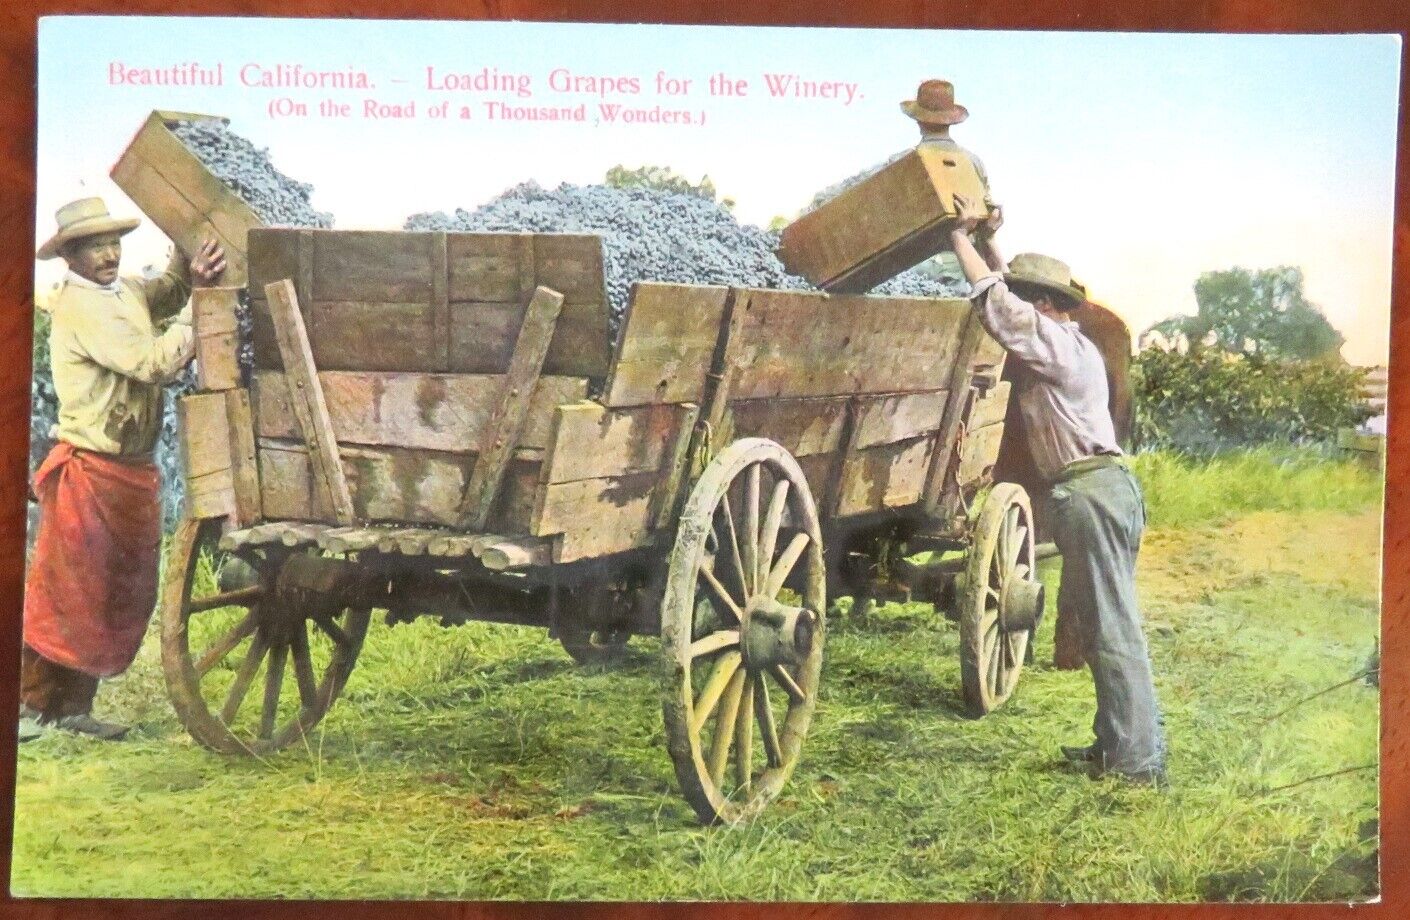 1910 VINTAGE POSTCARD LOADING GRAPES FOR THE WINERY POSTED LOLETA CA FARMING